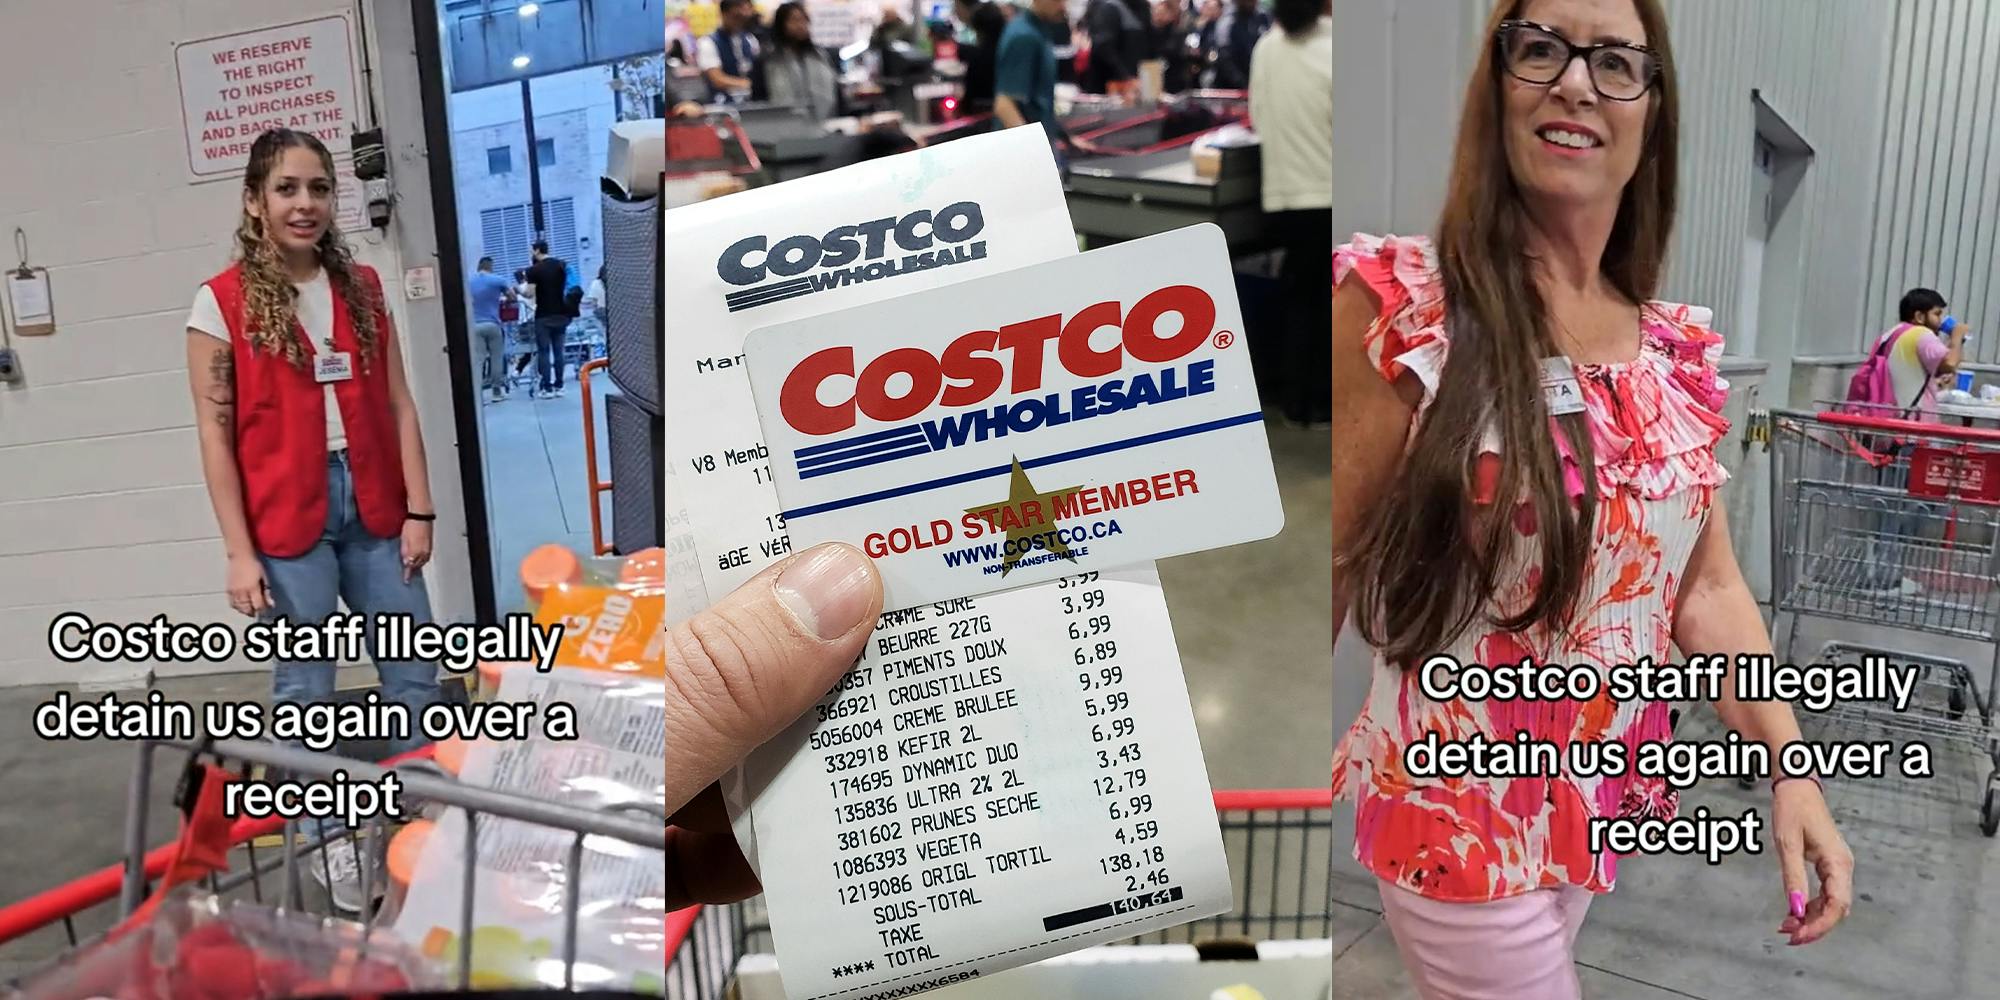 Costco shopper refuses to show workers his receipt, says they ‘illegally detained’ him for not doing so